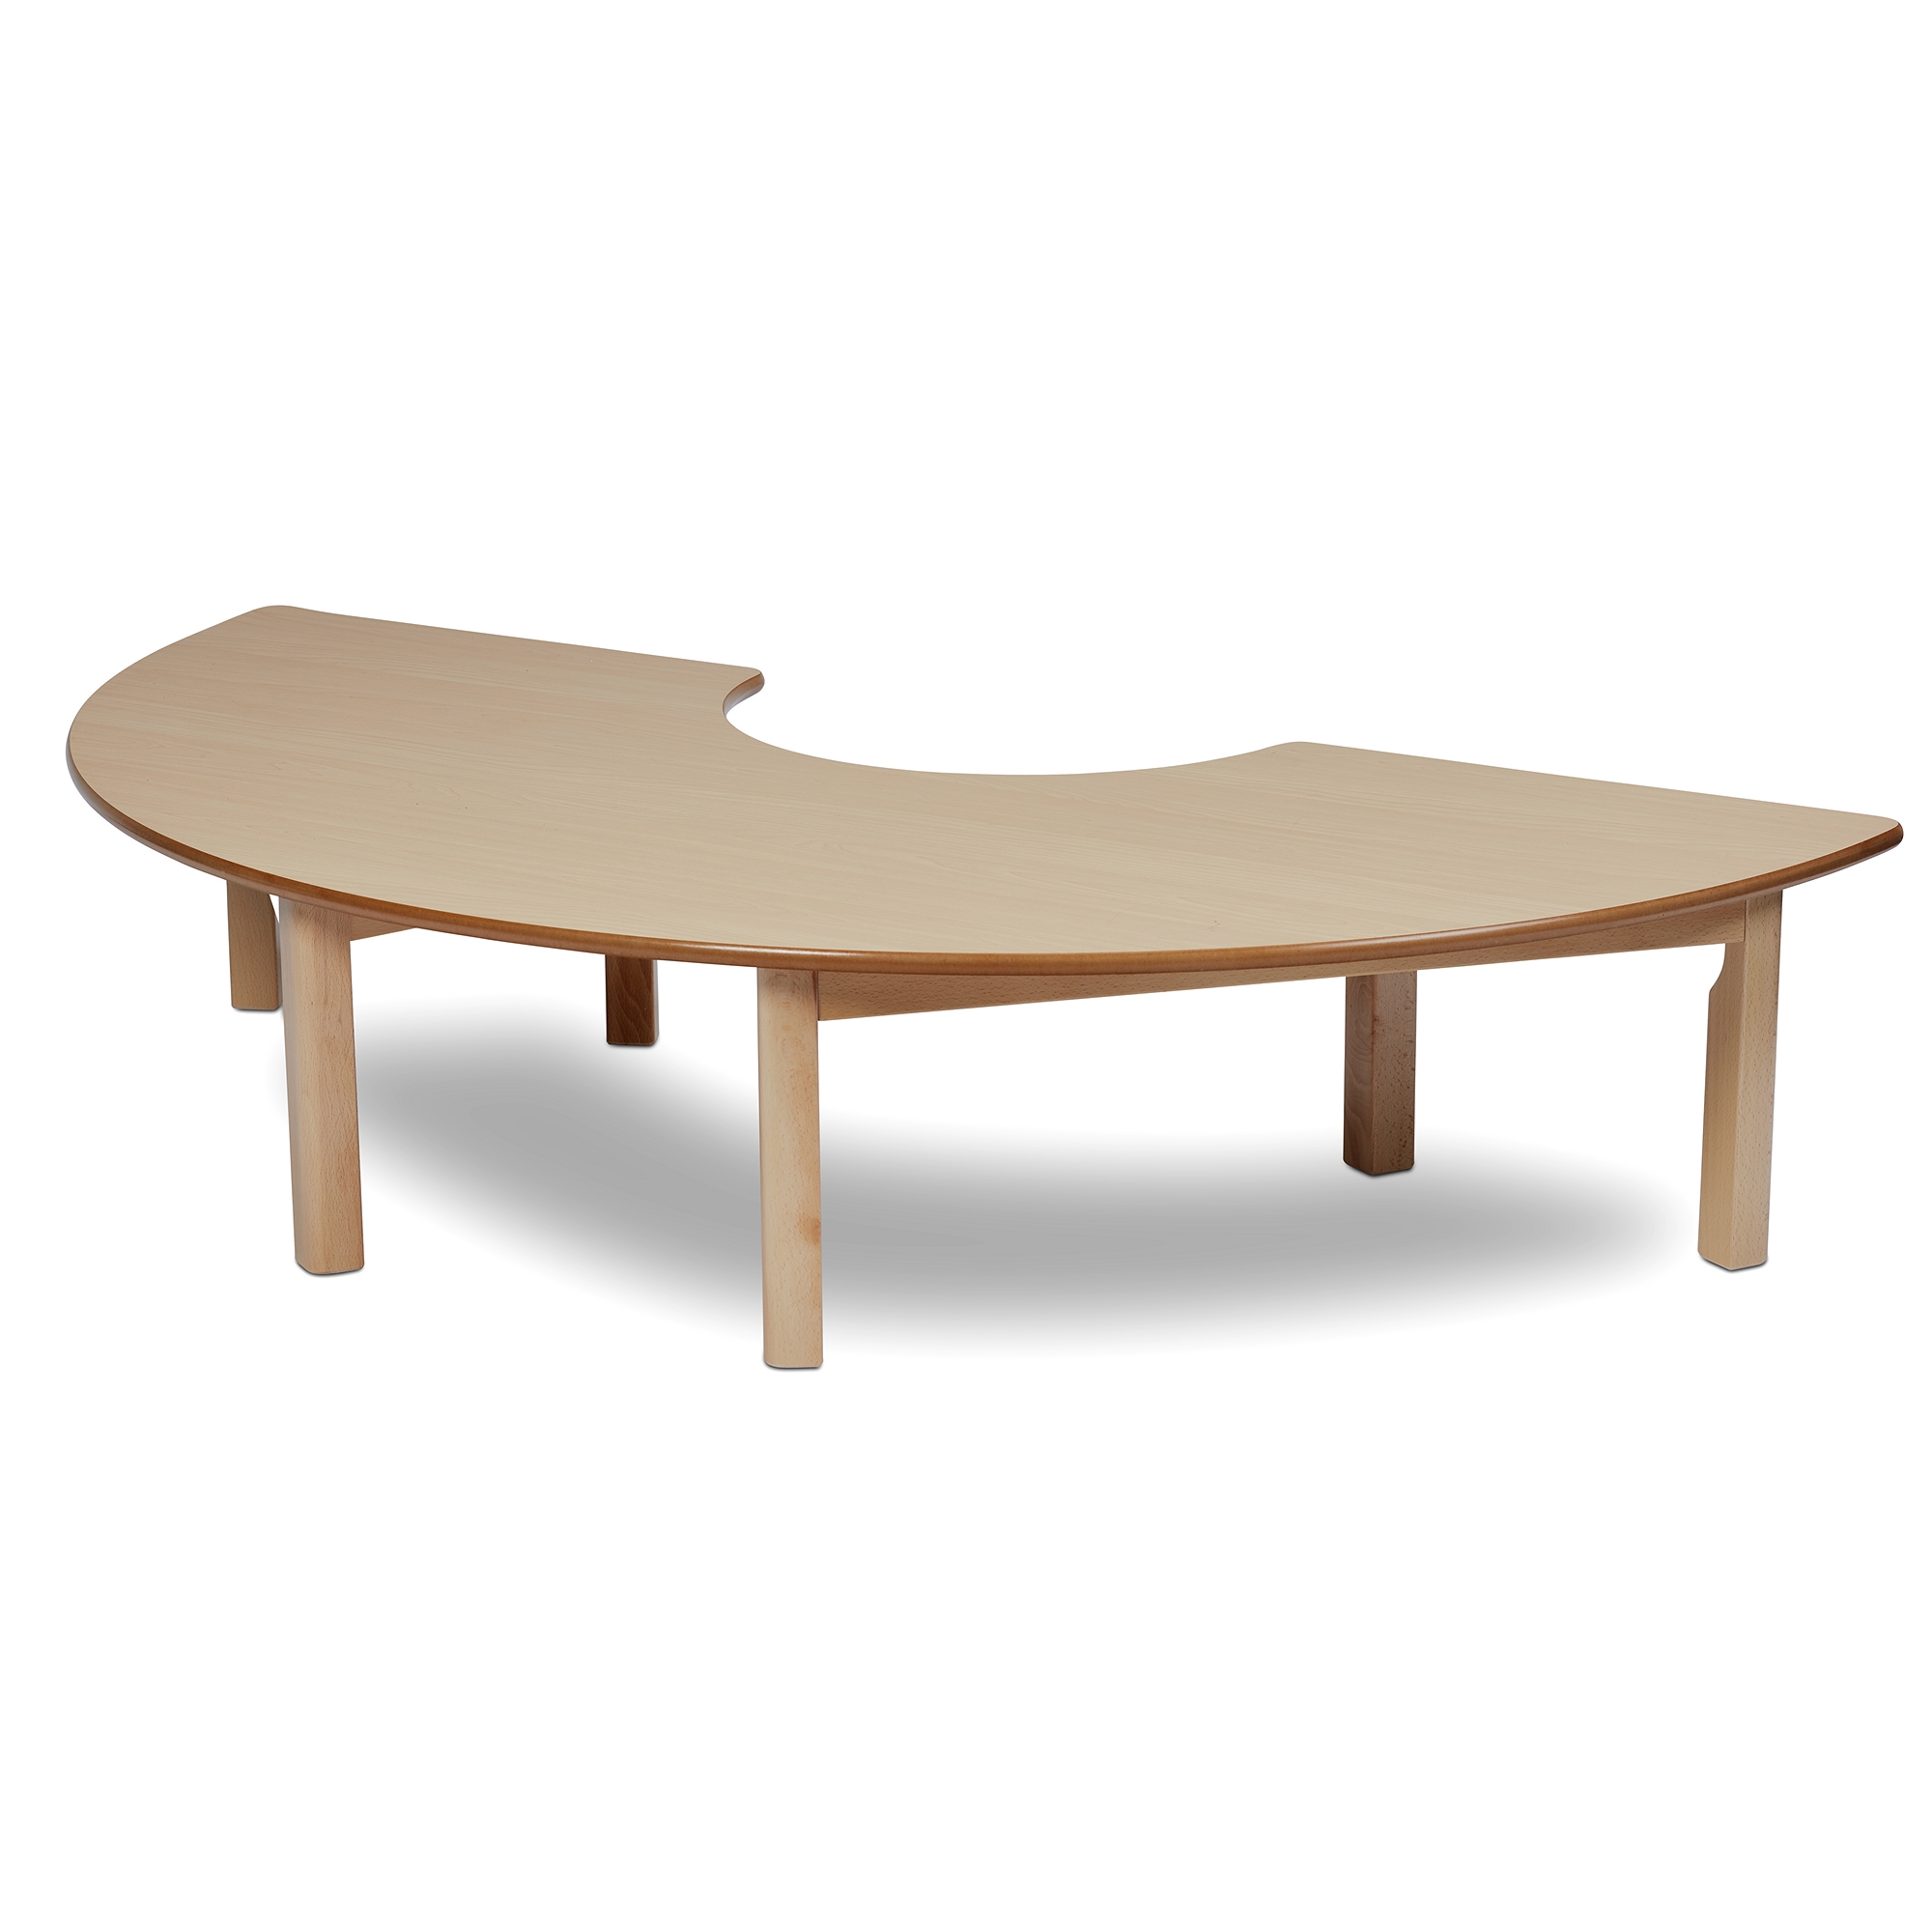 Playscapes Semi Circle Table - 530mm Height